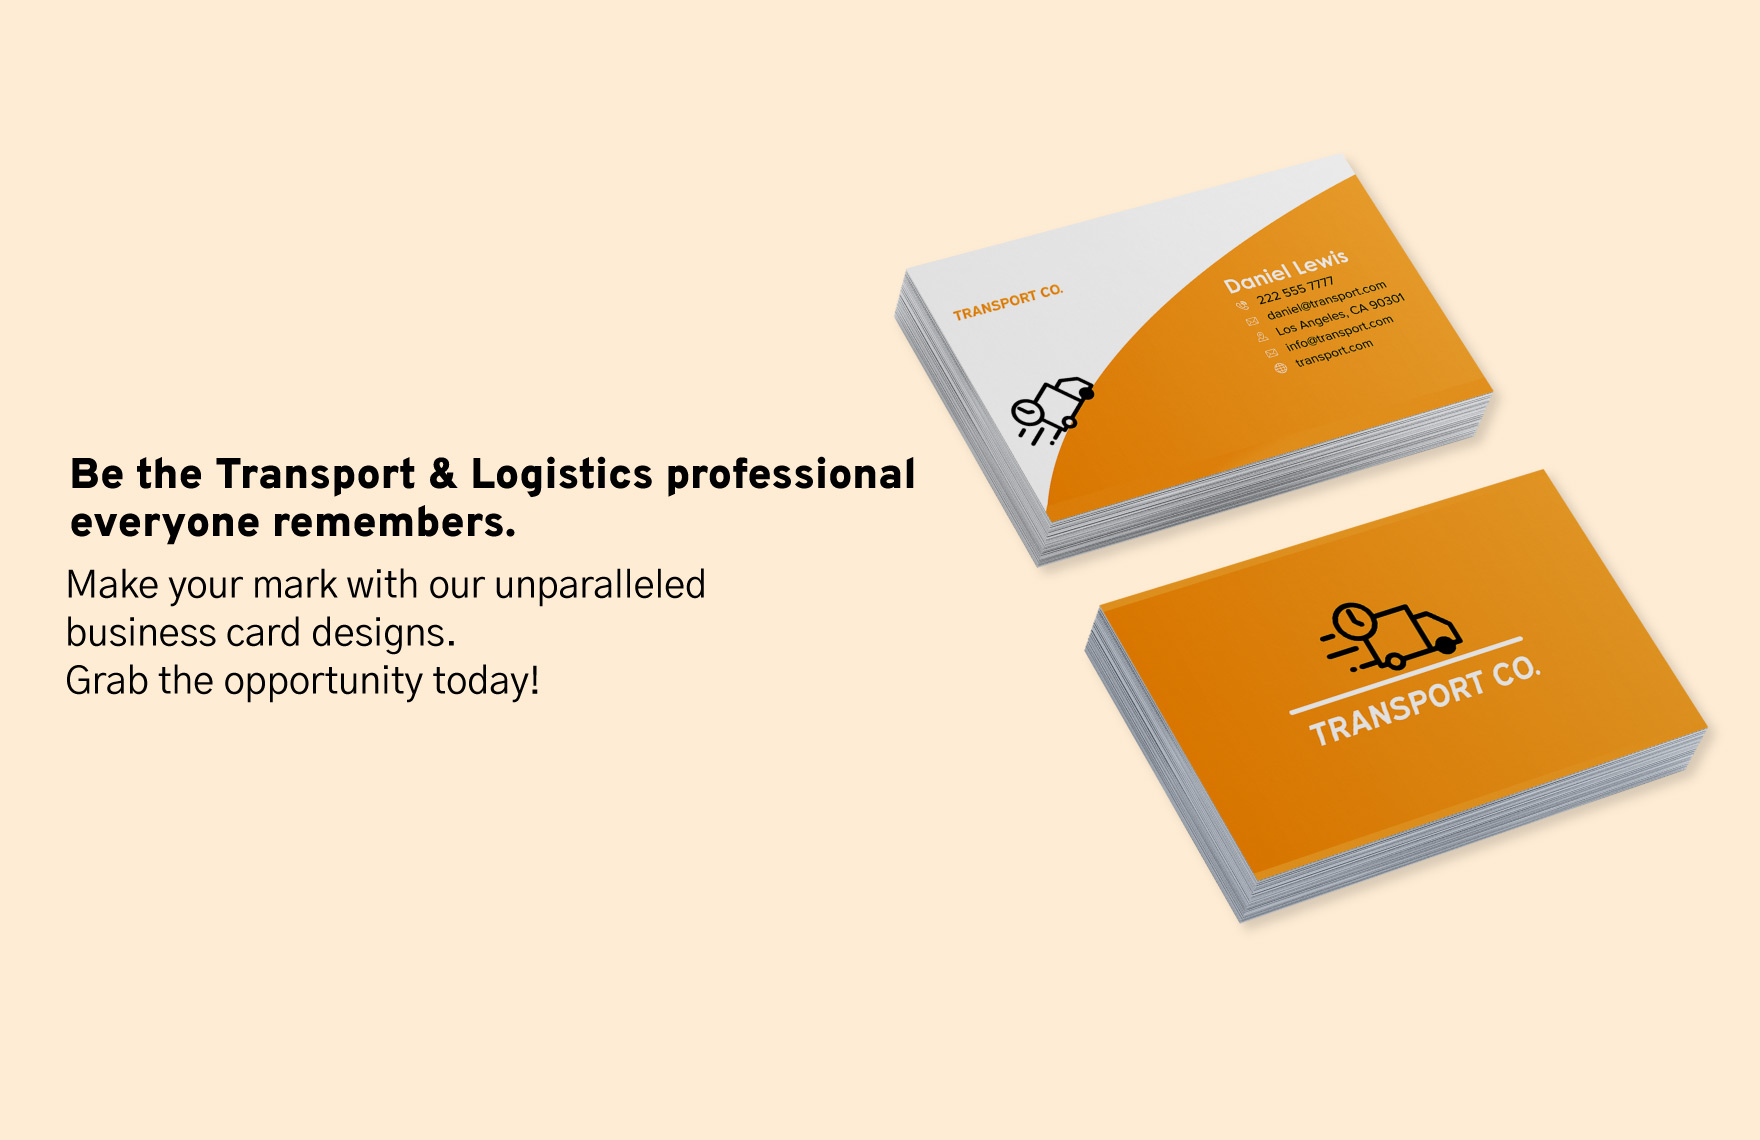 Transport and Logistics Express Parcel Delivery Card Template